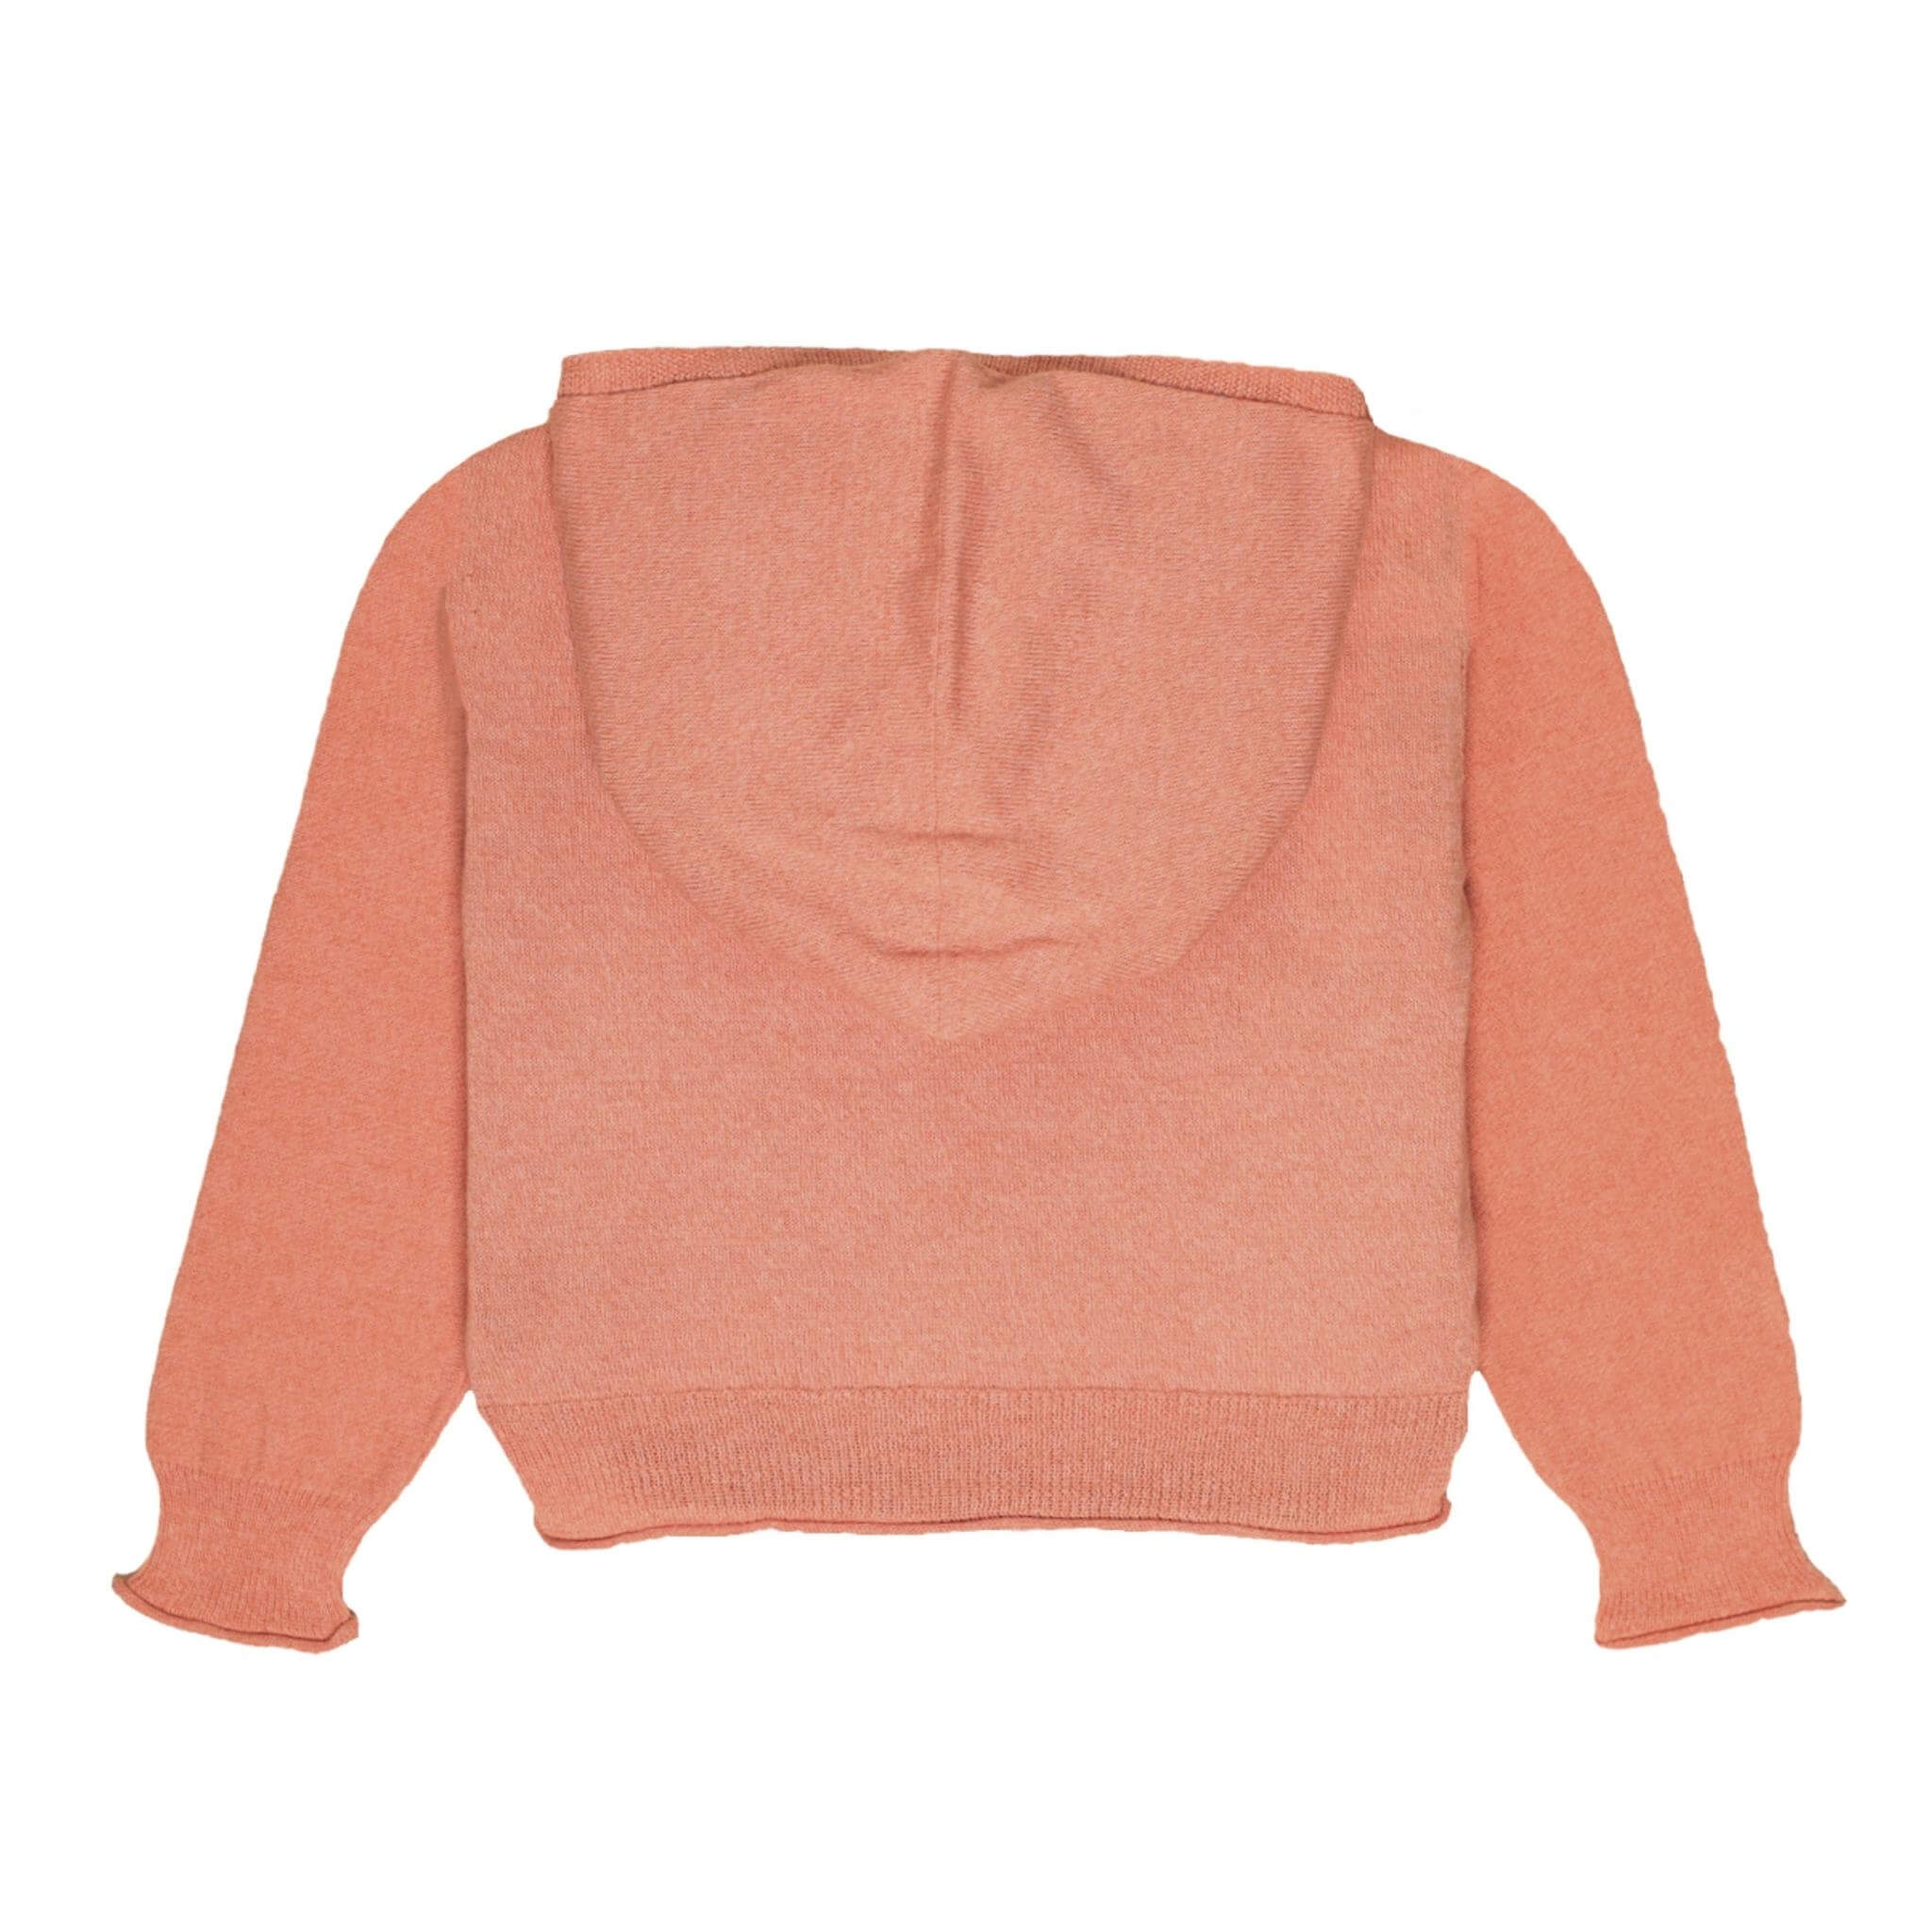 Cotton Cashmere Hoodie Sweater